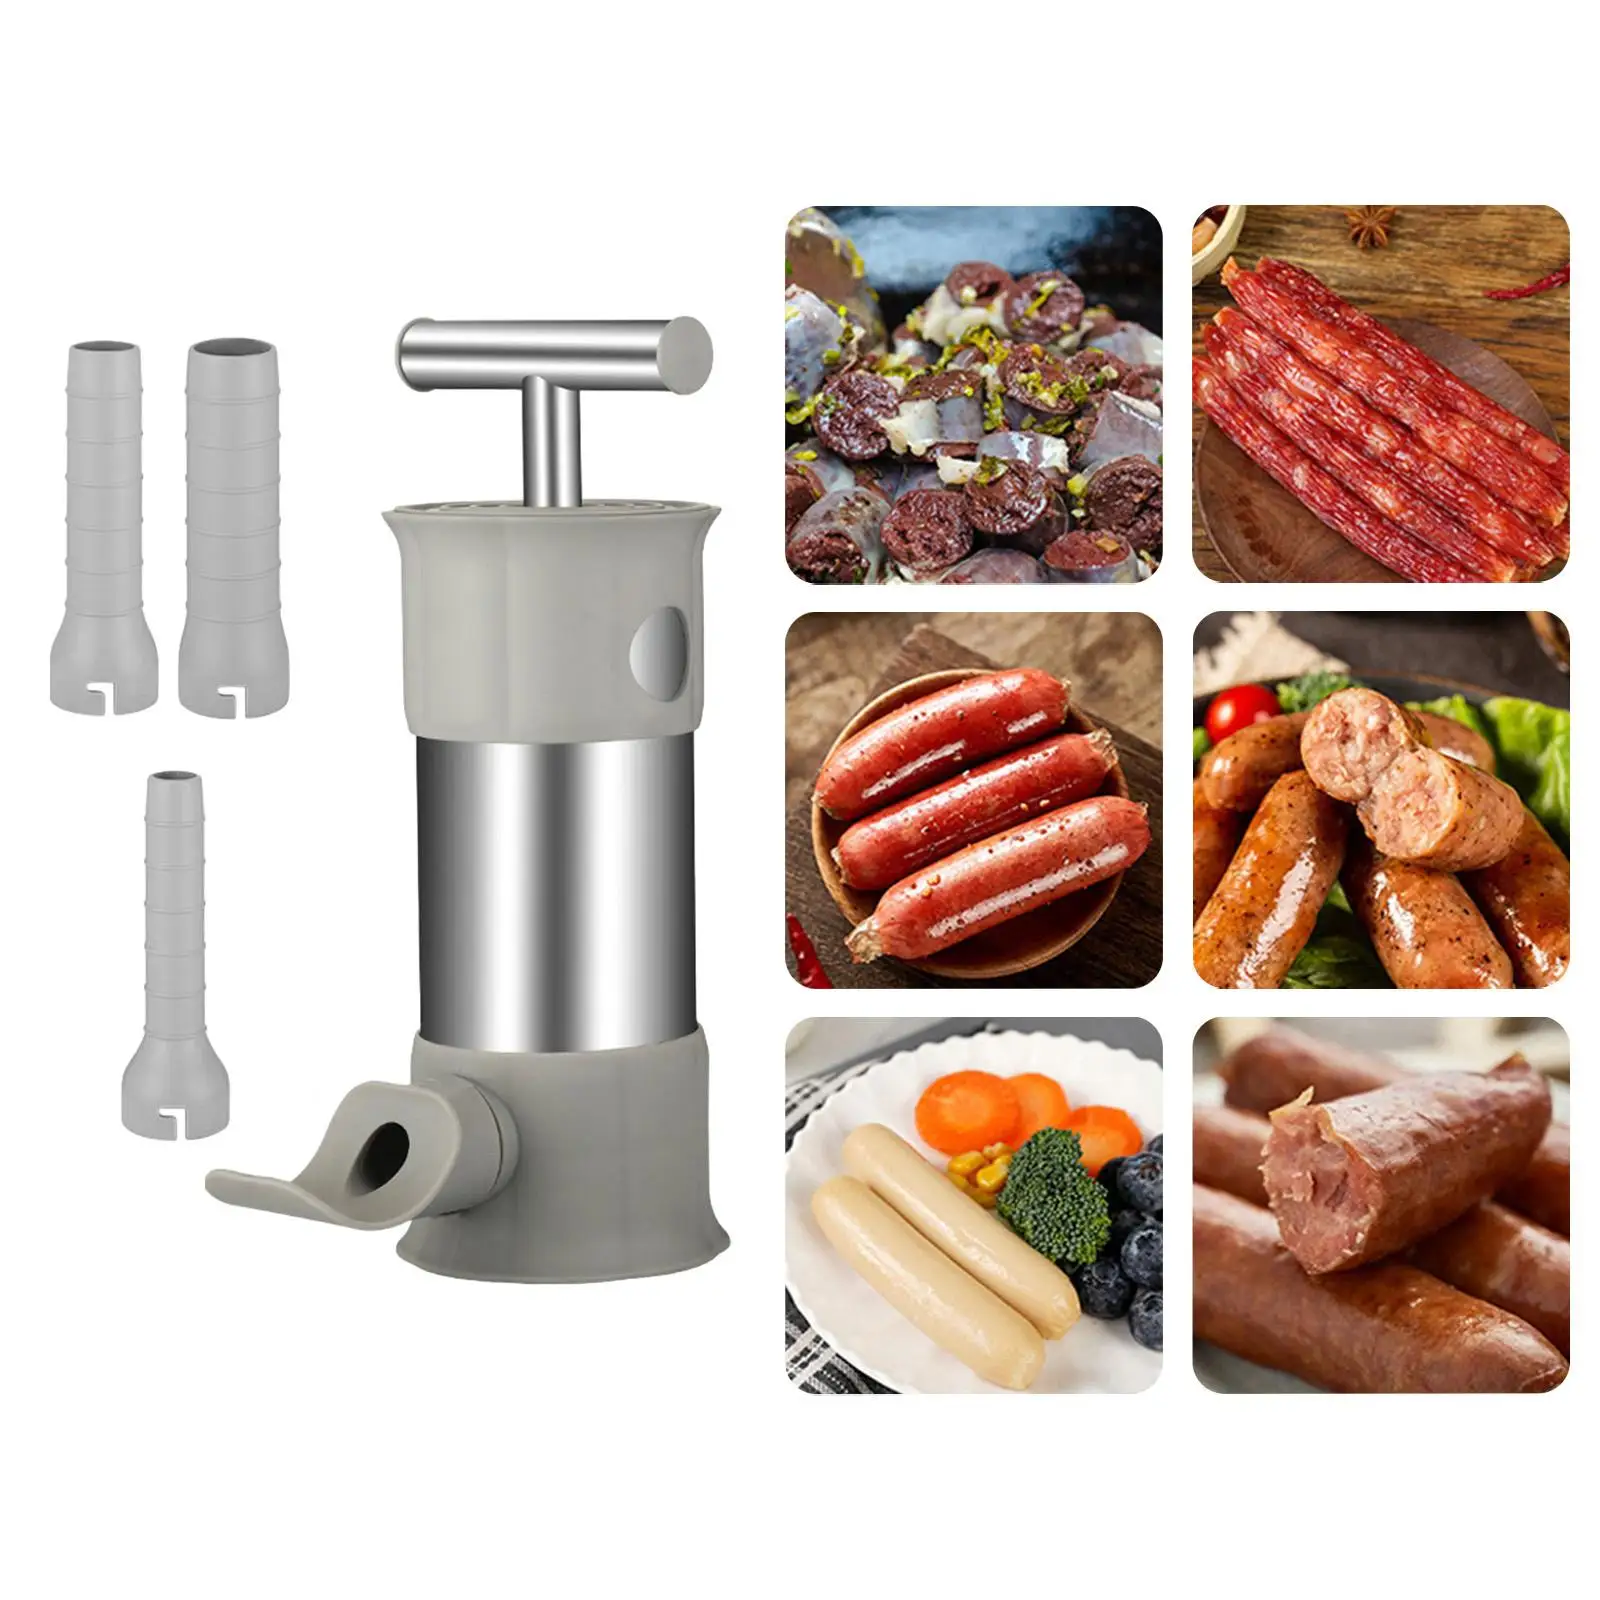 Sausage Filling Tools Meat Grinder for Household Stainless Steel Handheld Stuffing Tubes Sausage Maker Meat Sausage Machine